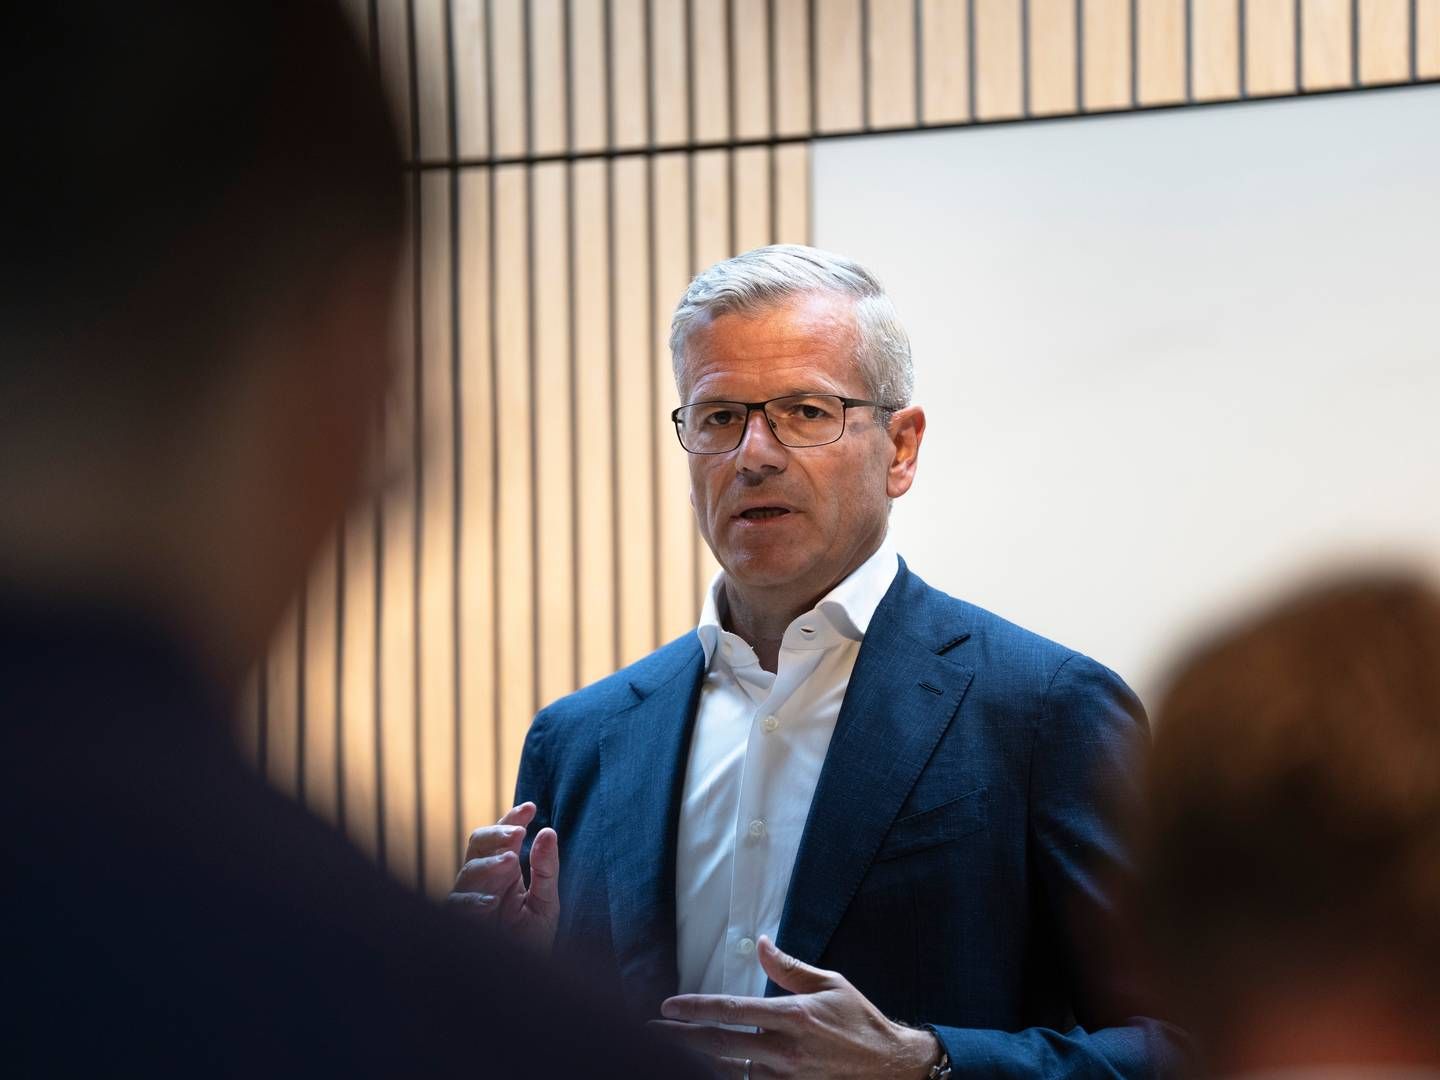 "Most of the order book has not yet been delivered from the yards. But so far, the industry has been disciplined enough to manage capacity," Vincent Clerc, CEO of Maersk, said at a press conference last week. | Photo: Thomas Traasdahl